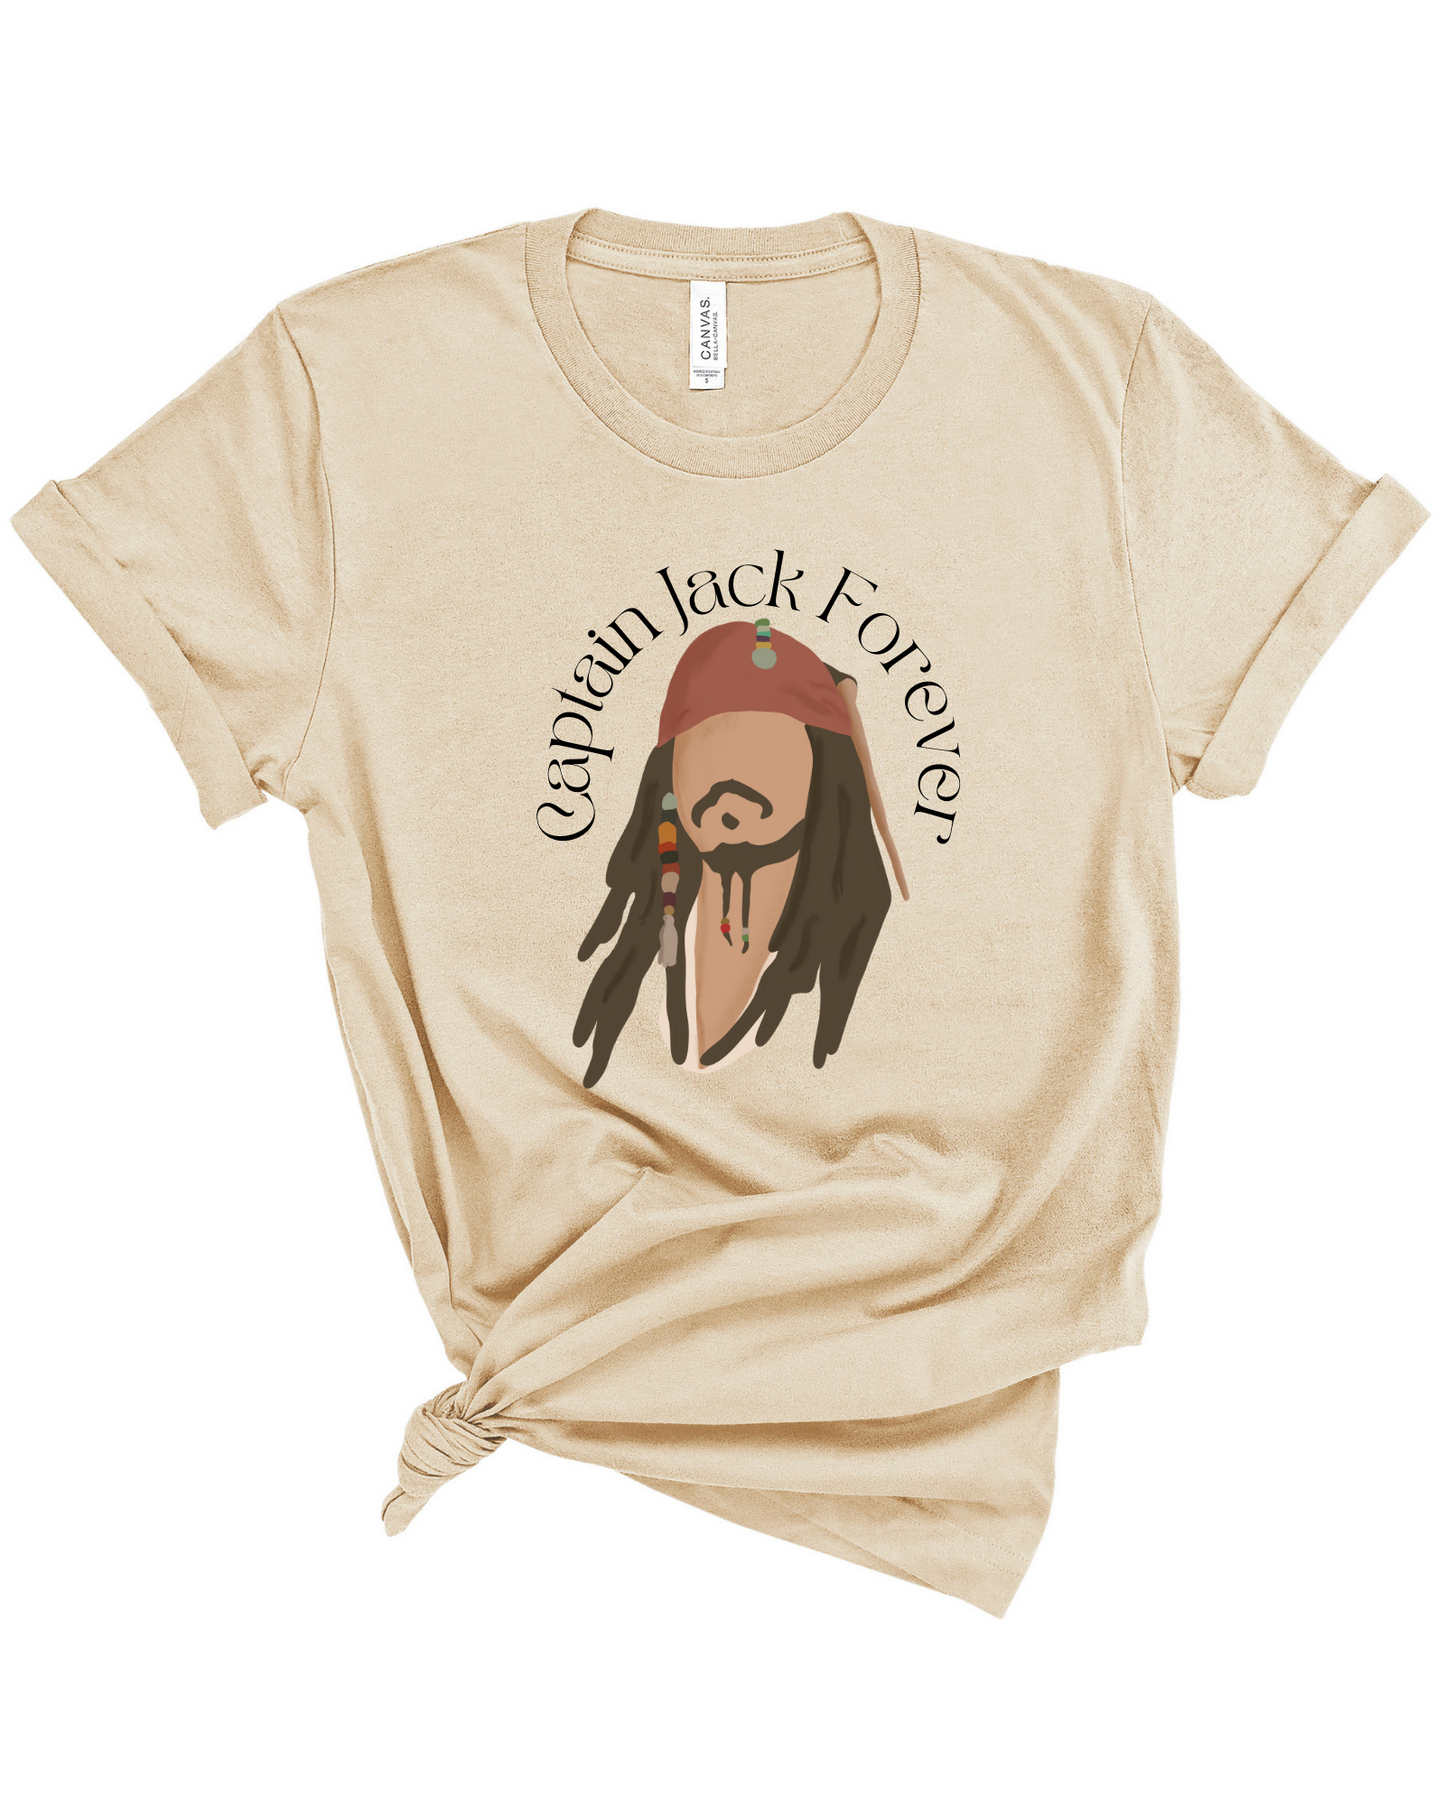 Captain Jack Forever | Adult Tee-Adult Tee-Sister Shirts-Sister Shirts, Cute & Custom Tees for Mama & Littles in Trussville, Alabama.